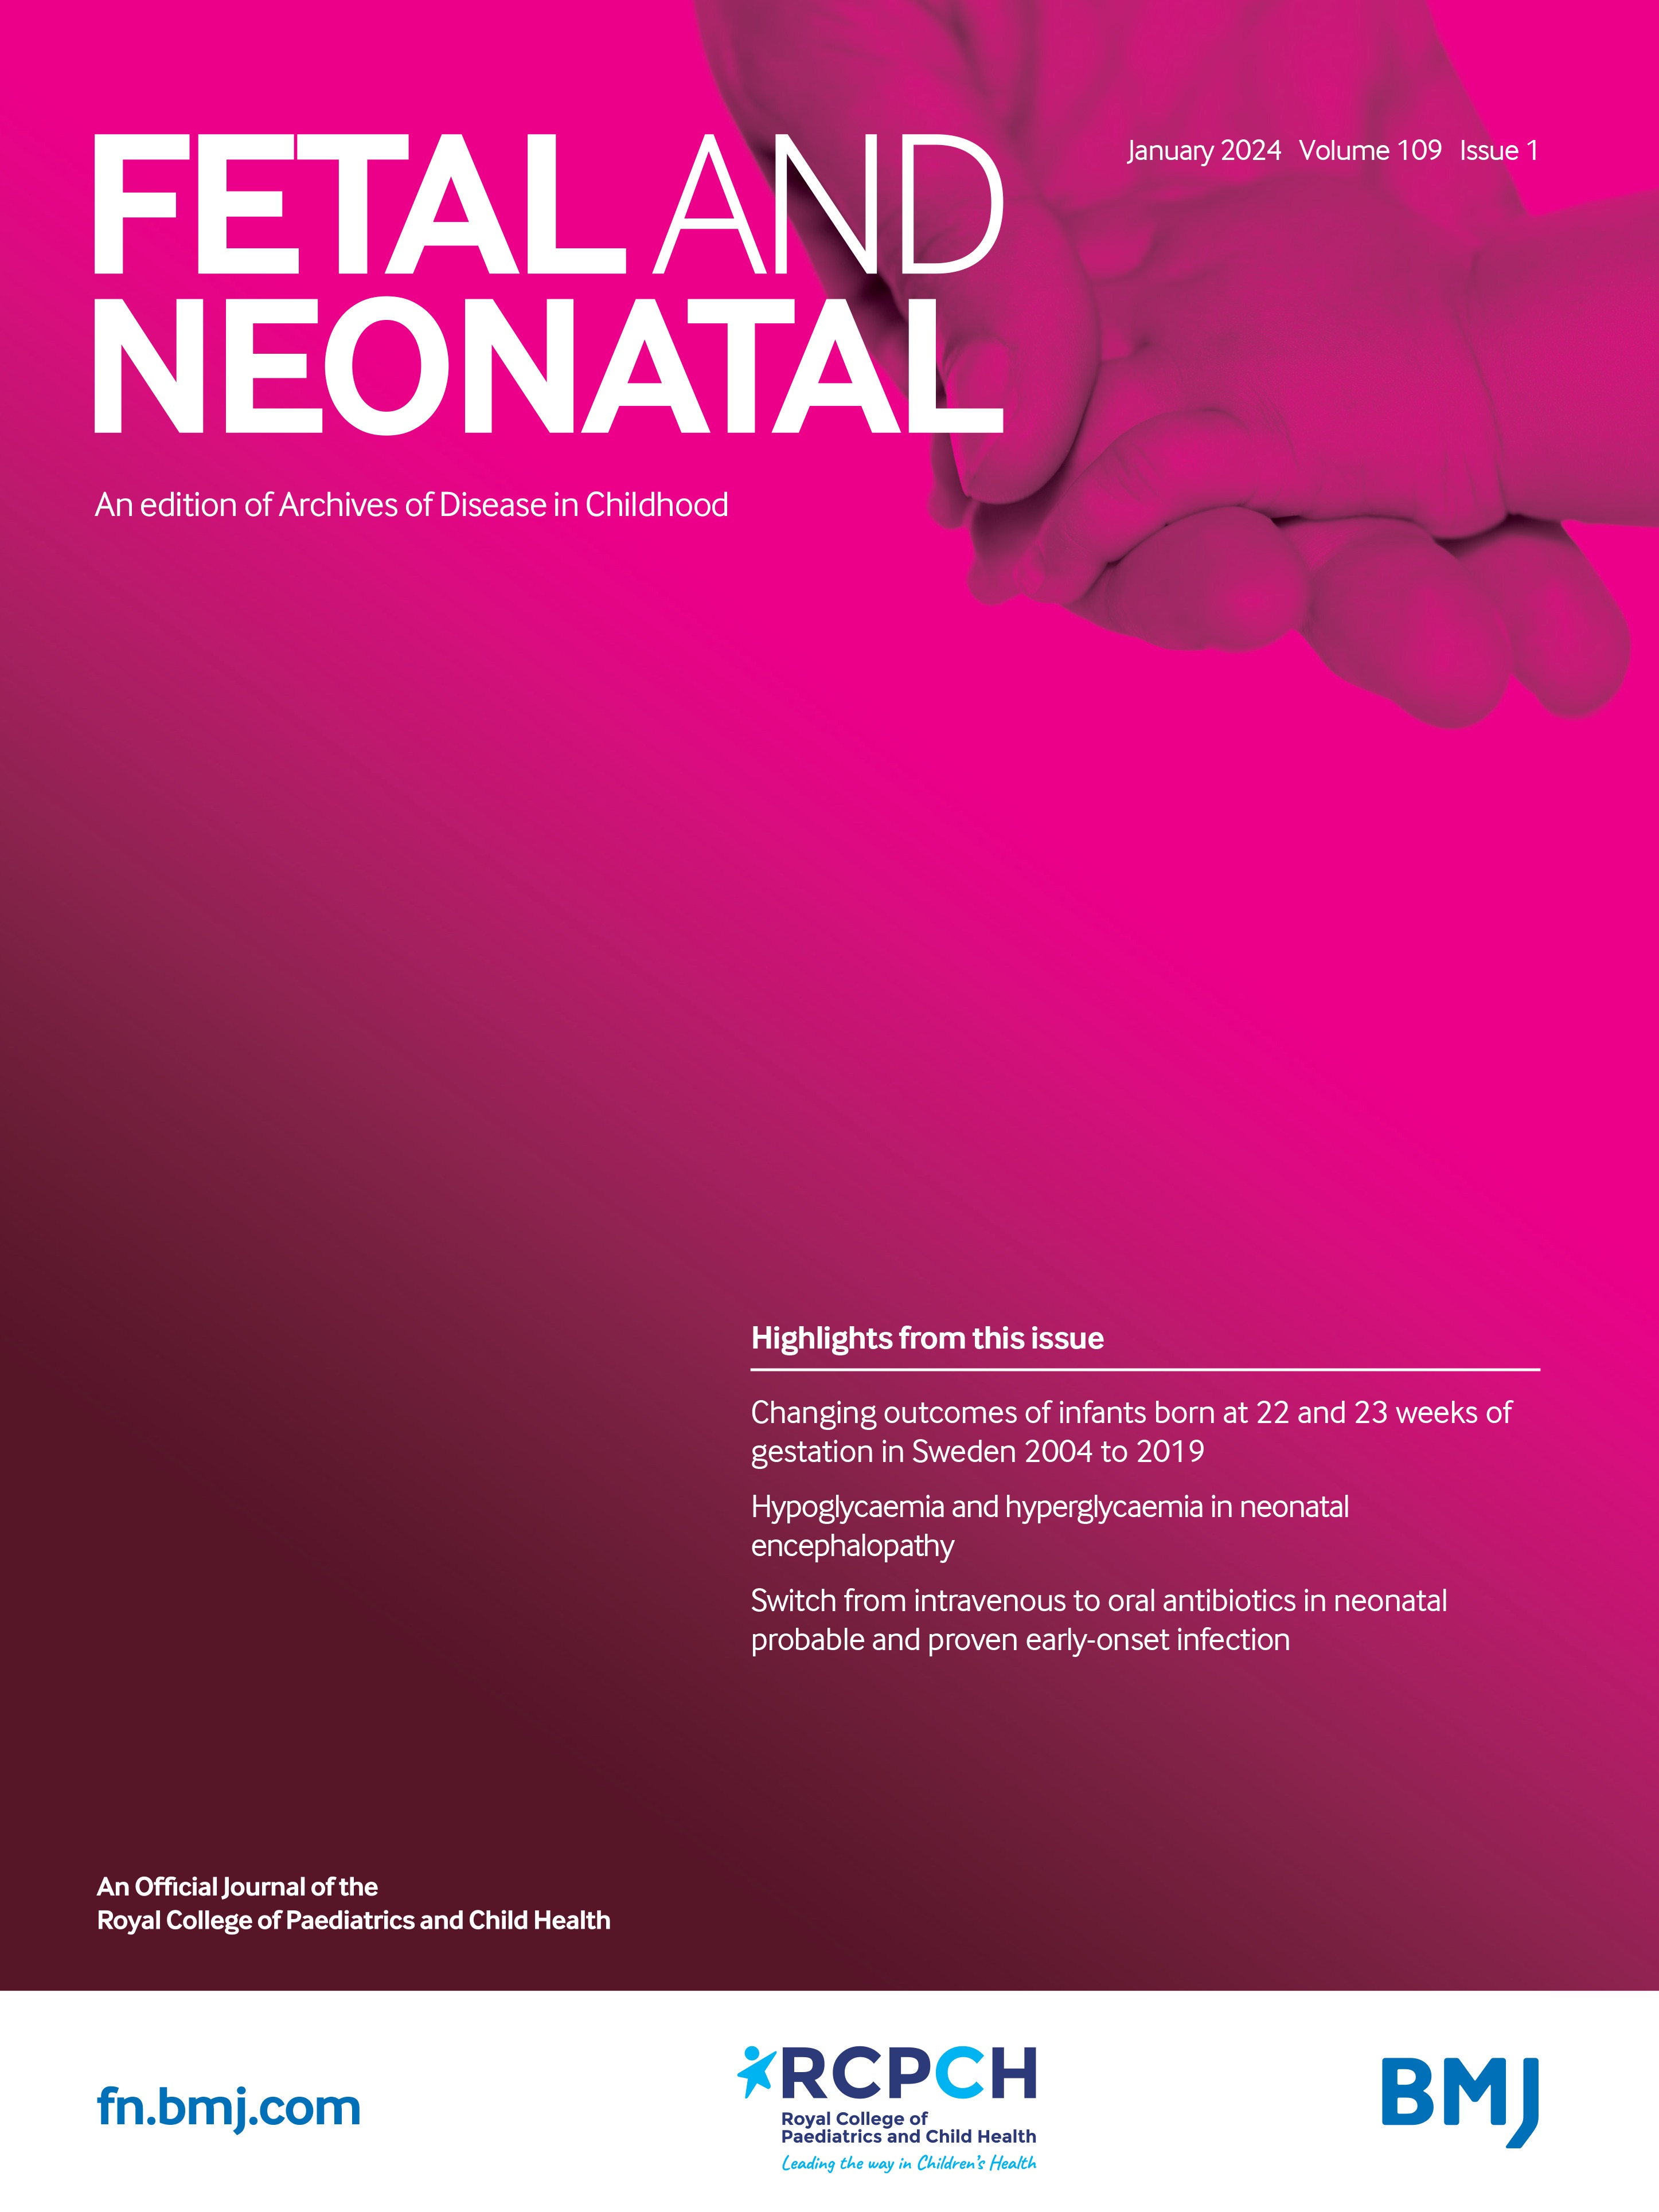 Missed or delayed diagnosis of anorectal malformations: a review of the literature, current training and practice in the UK in relation to detection via the NIPE programme